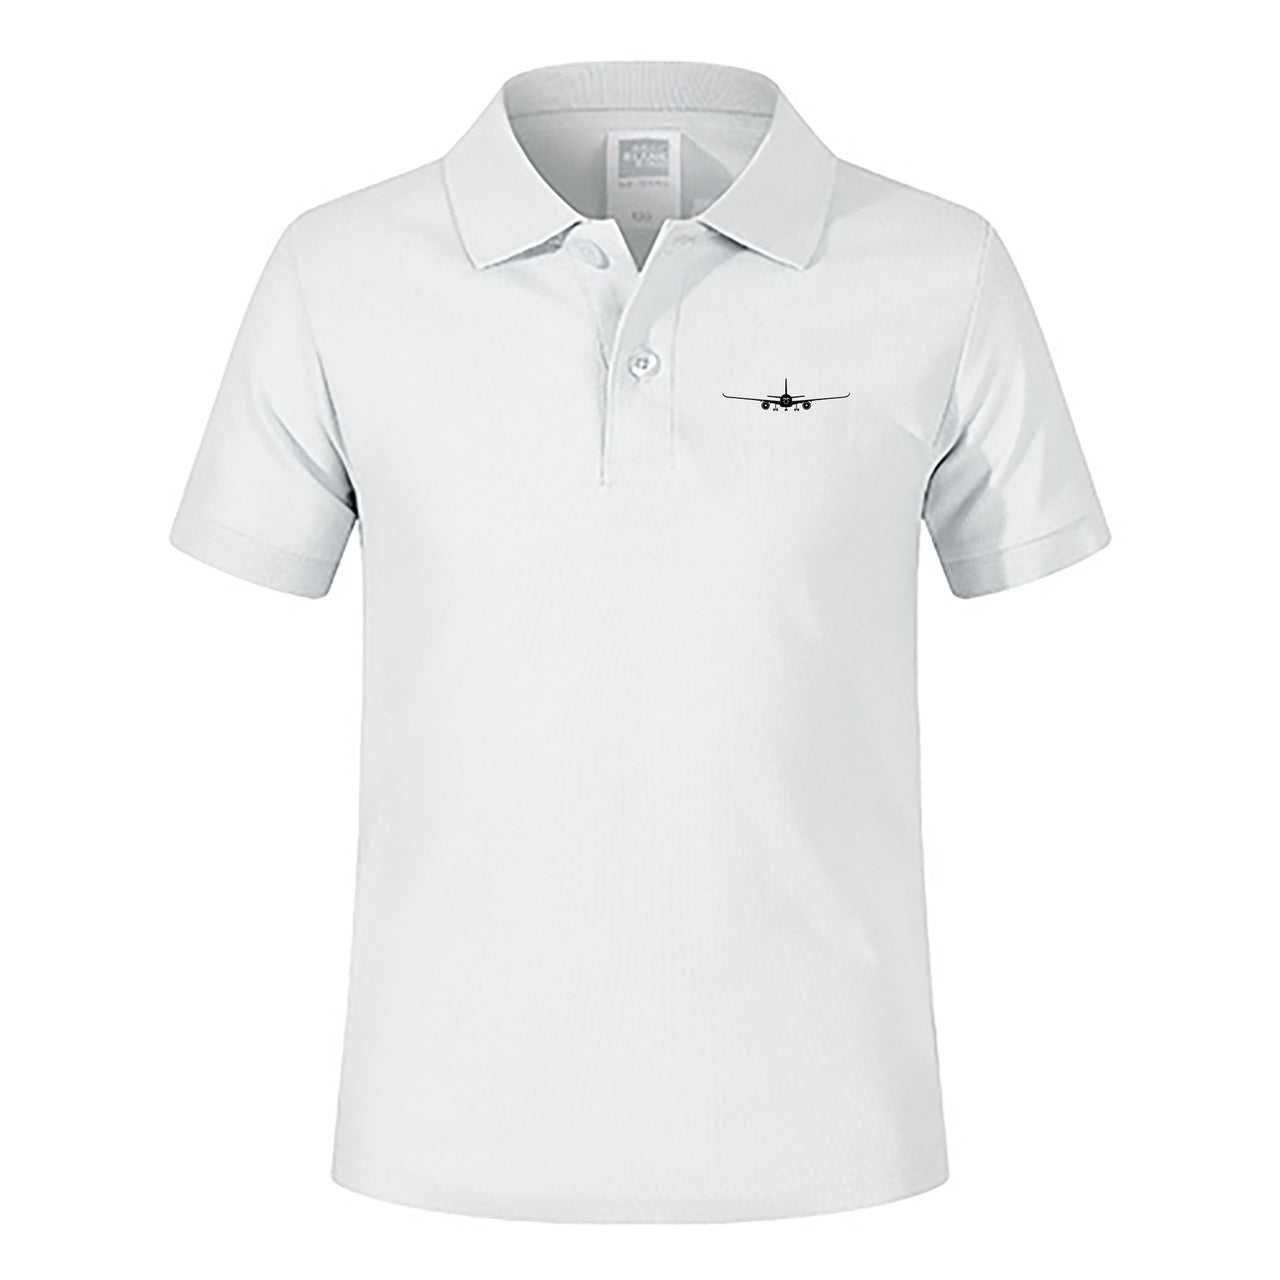 Airbus A350 Silhouette Designed Children Polo T-Shirts